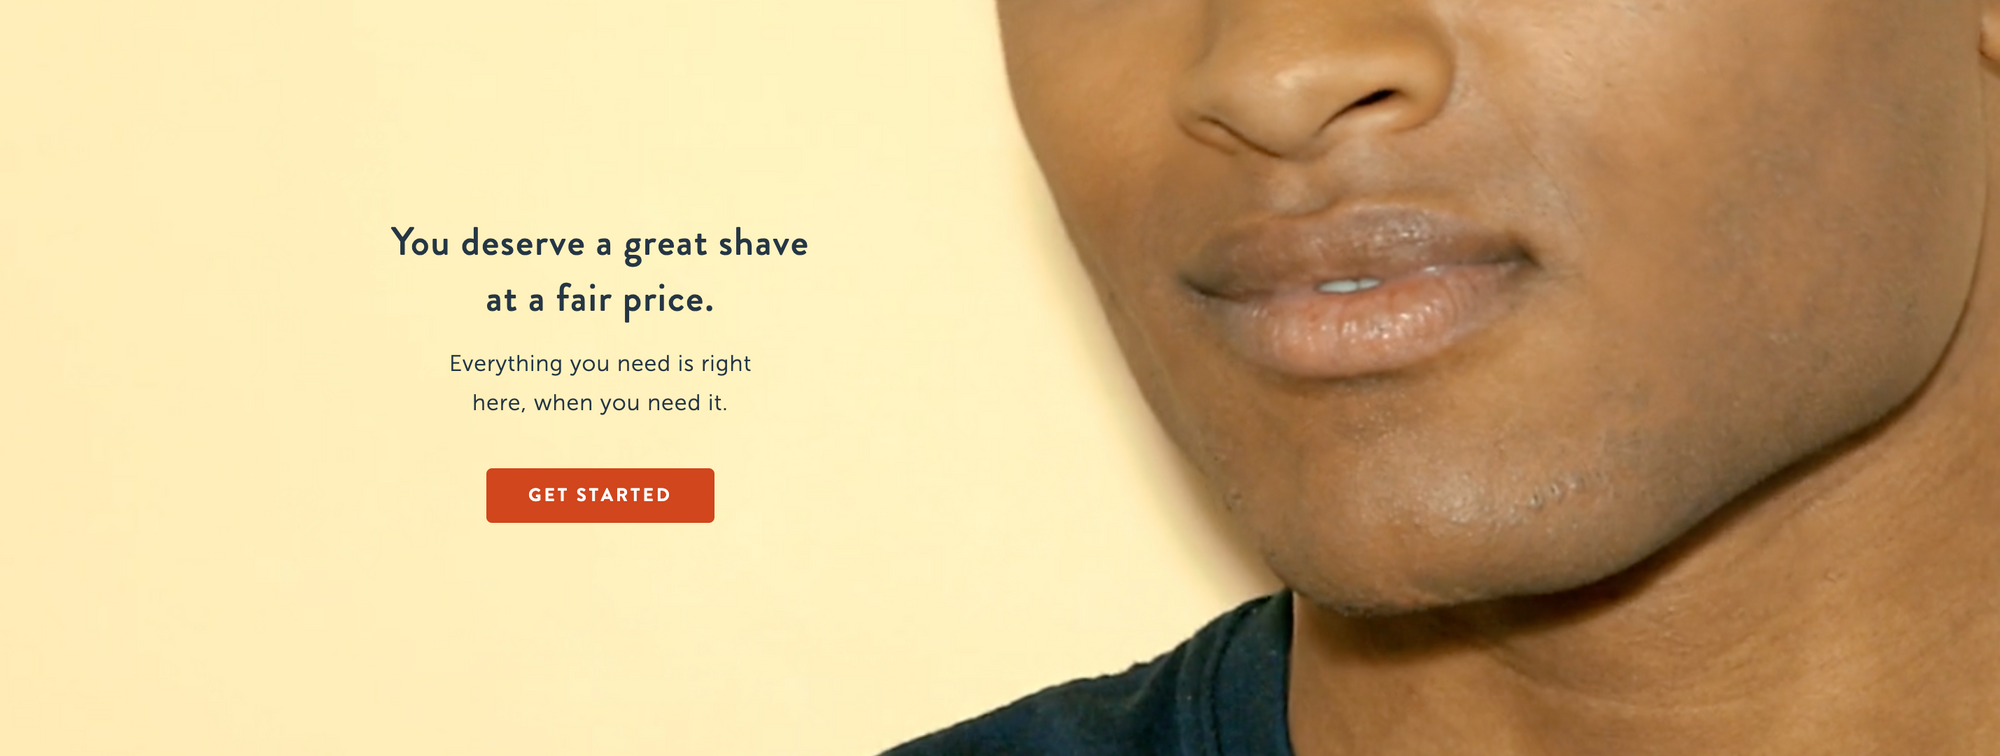 Men’s grooming brand, Harry’s value proposition is front and center of its home page.